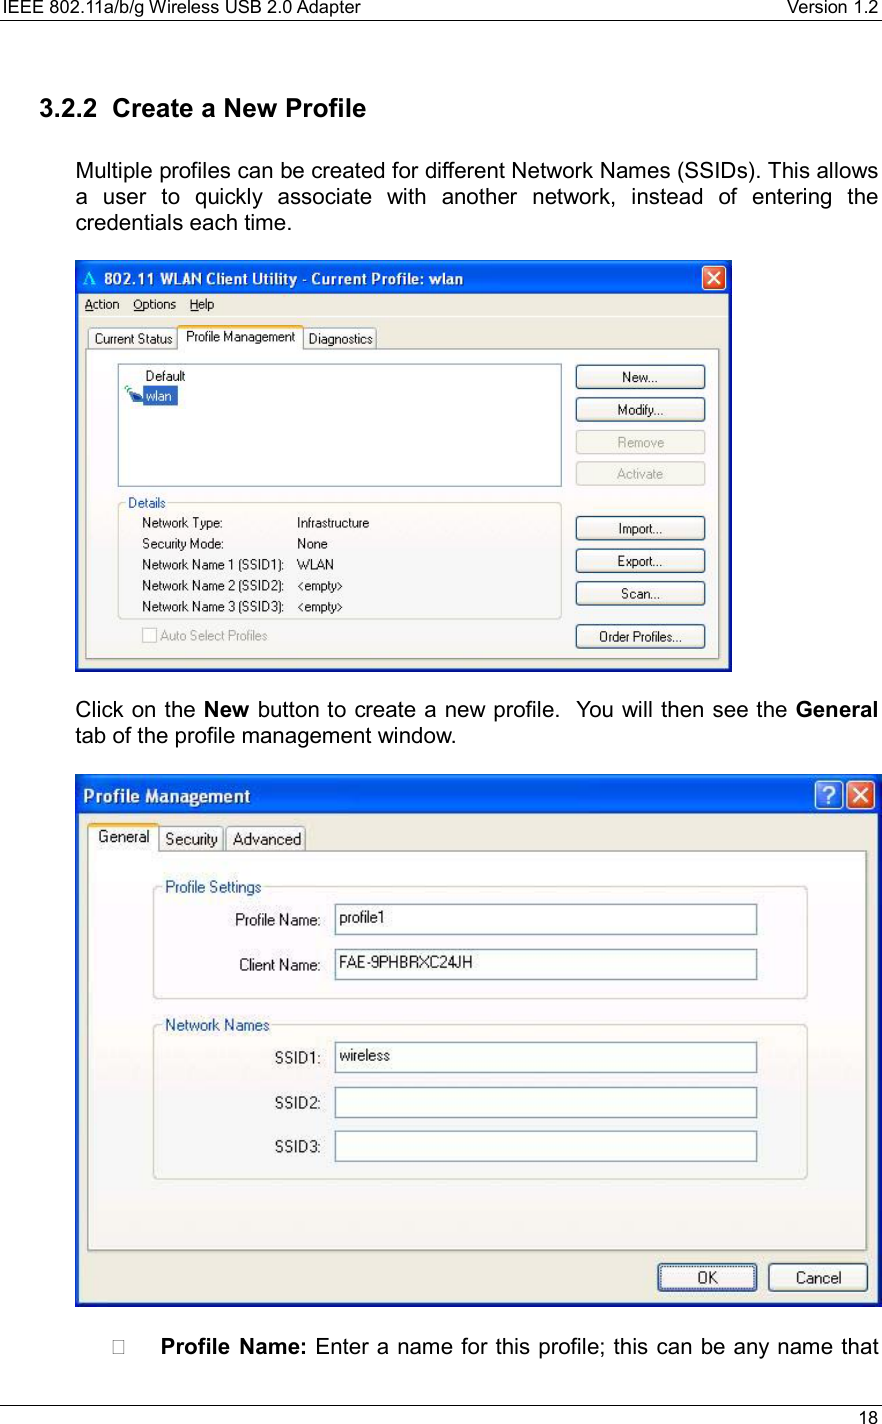 IEEE 802.11a/b/g Wireless USB 2.0 Adapter    Version 1.2   18  3.2.2  Create a New Profile   Multiple profiles can be created for different Network Names (SSIDs). This allows a user to quickly associate with another network, instead of entering the credentials each time.      Click on the New button to create a new profile.  You will then see the General tab of the profile management window.        Profile Name: Enter a name for this profile; this can be any name that 